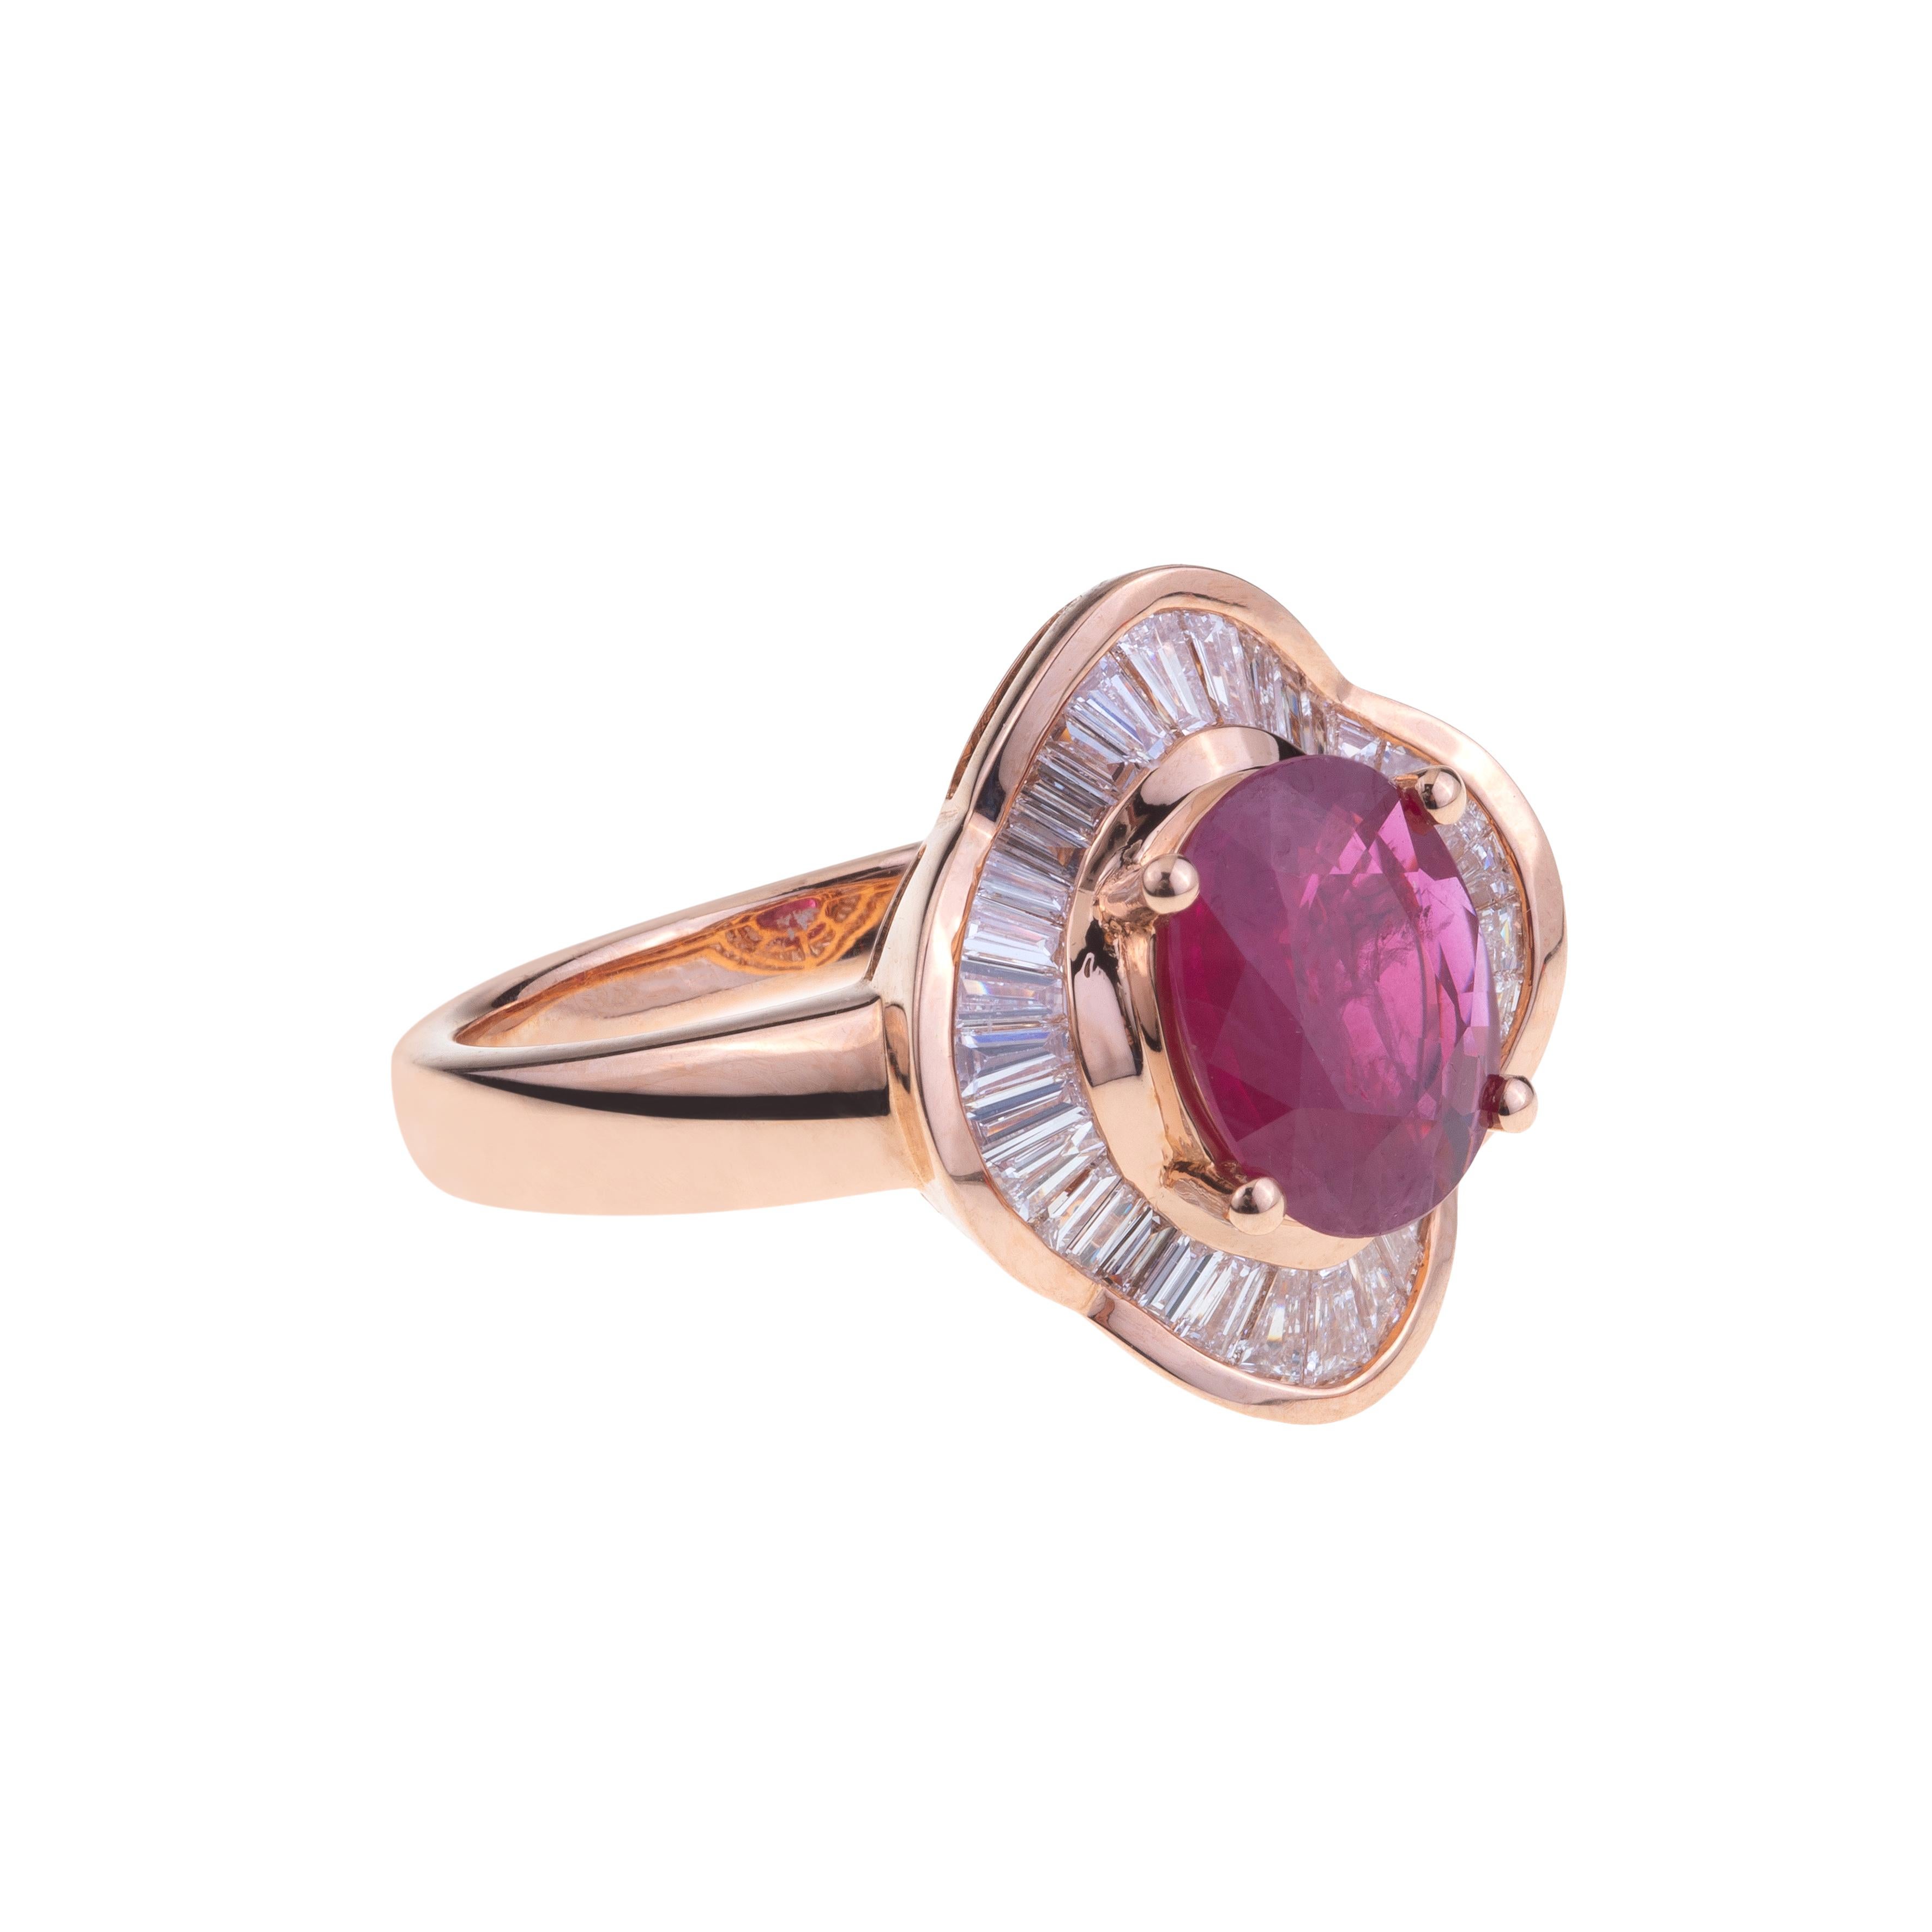 Oval Ruby Ring Rose Gold Set with Baguette Diamonds.
The Ring is Dominated by an Exceptional  Red Ruby ct. 1.56 Oval Cut , set with Rose Gold and Baguette cut Diamonds ct. 0.65 VVS. The weight of the 18kt gold is gr. 6.26.
Designed in Italy.